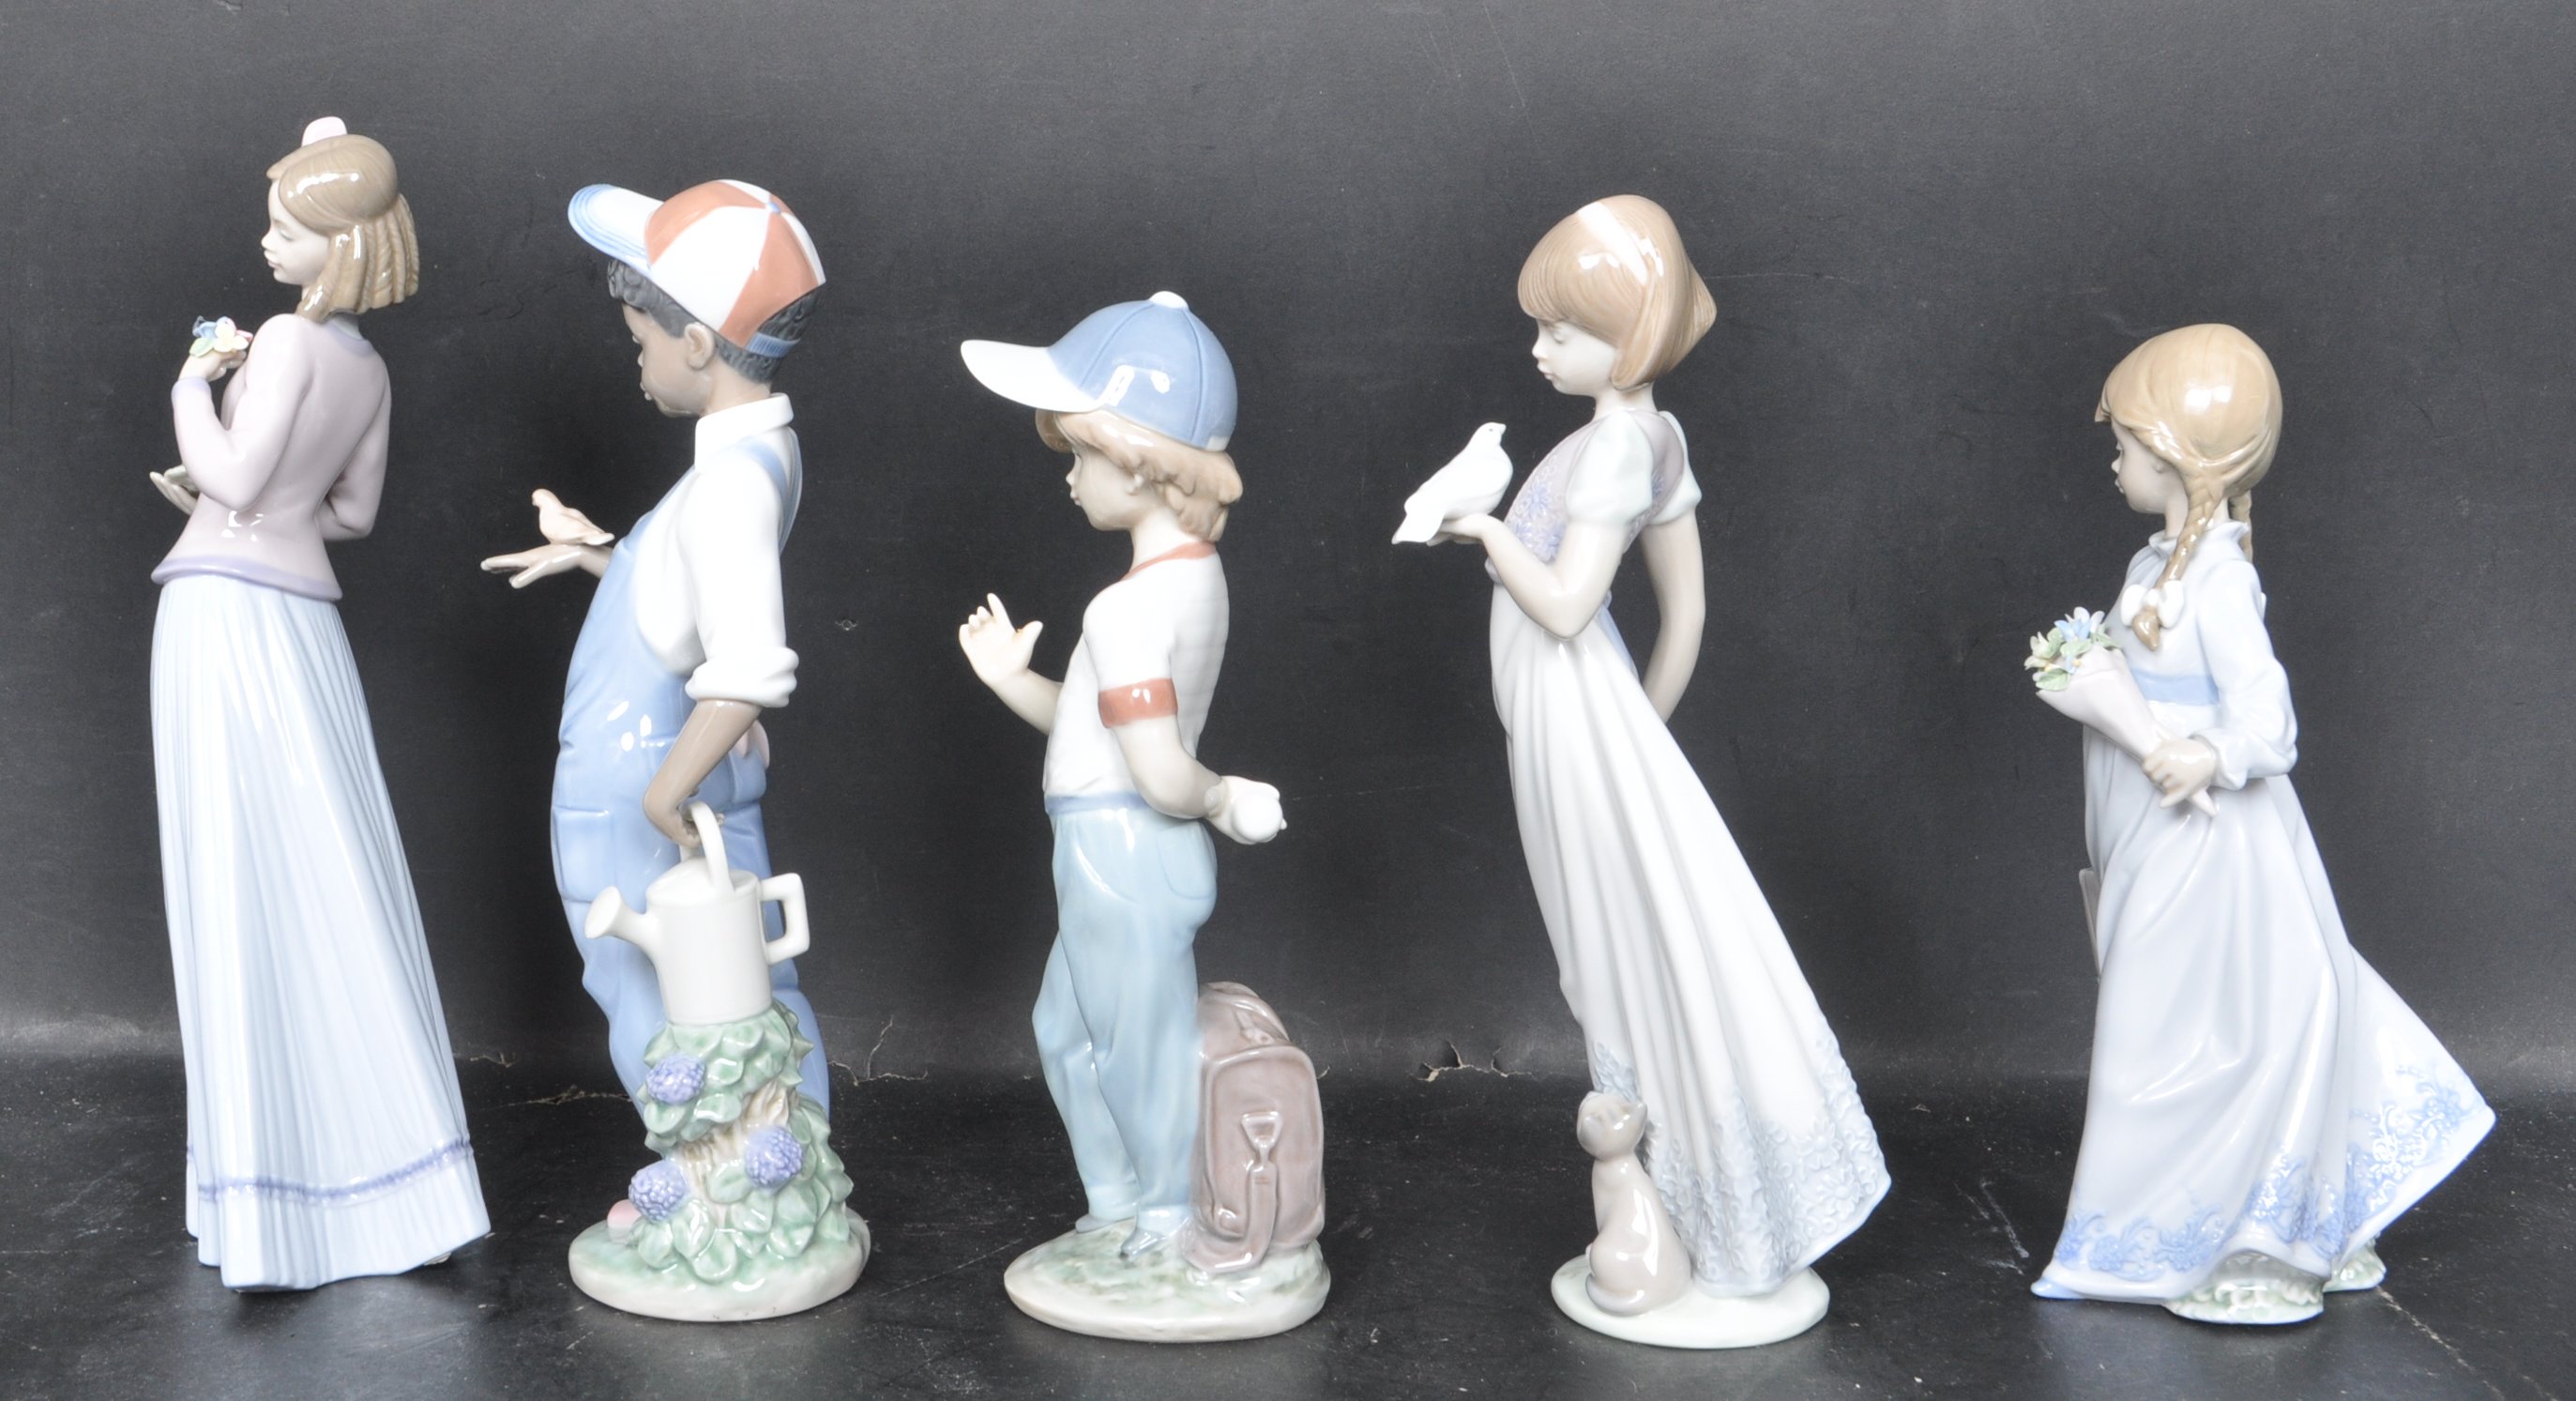 COLLECTION OF FIVE SPANISH LLADRO CERAMIC PORCELAIN FIGURINES - Image 4 of 6